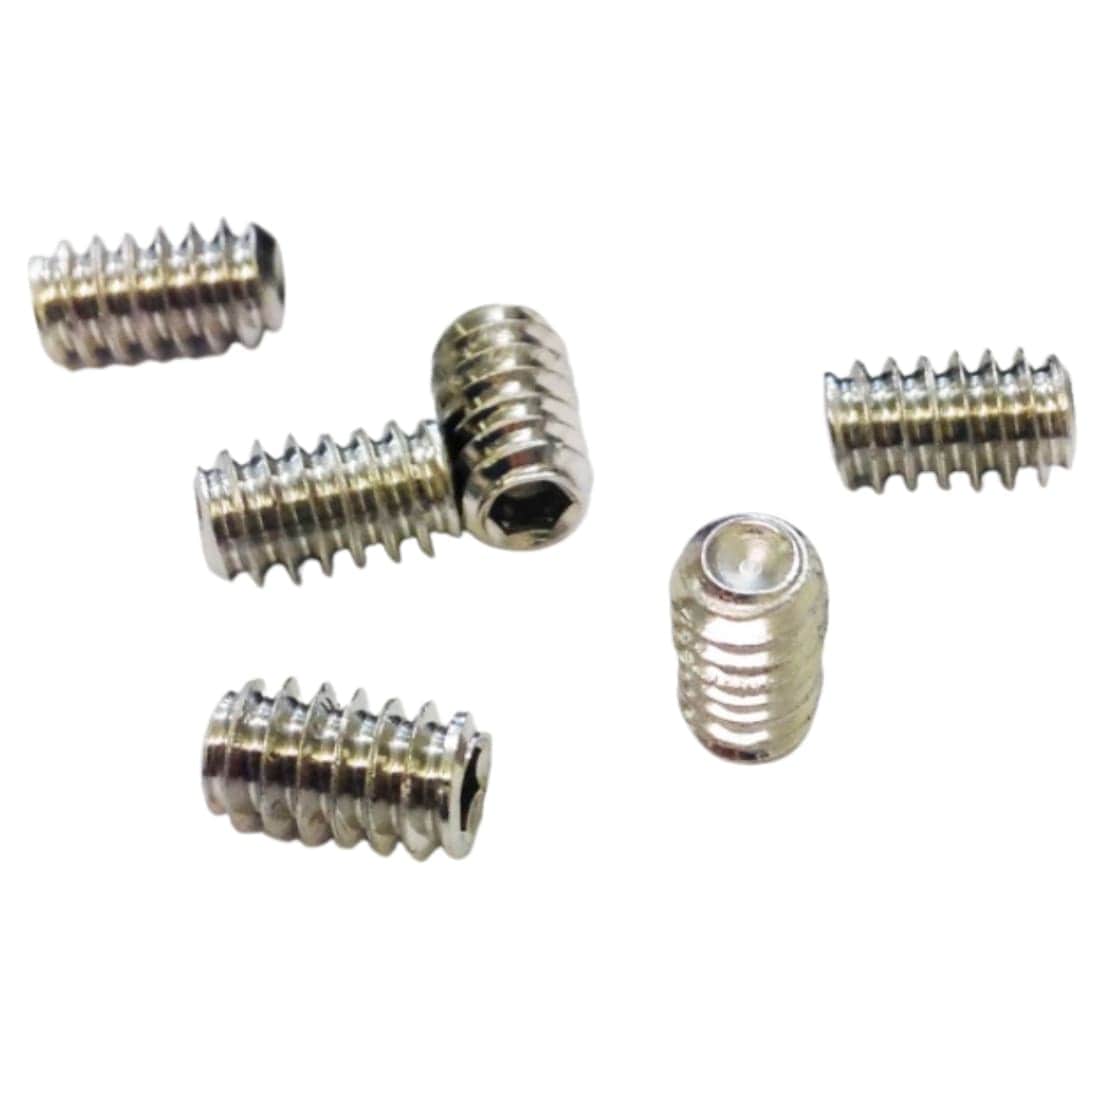 Northcore Replacement FCS Grub Screws (6 Pack) - Silver